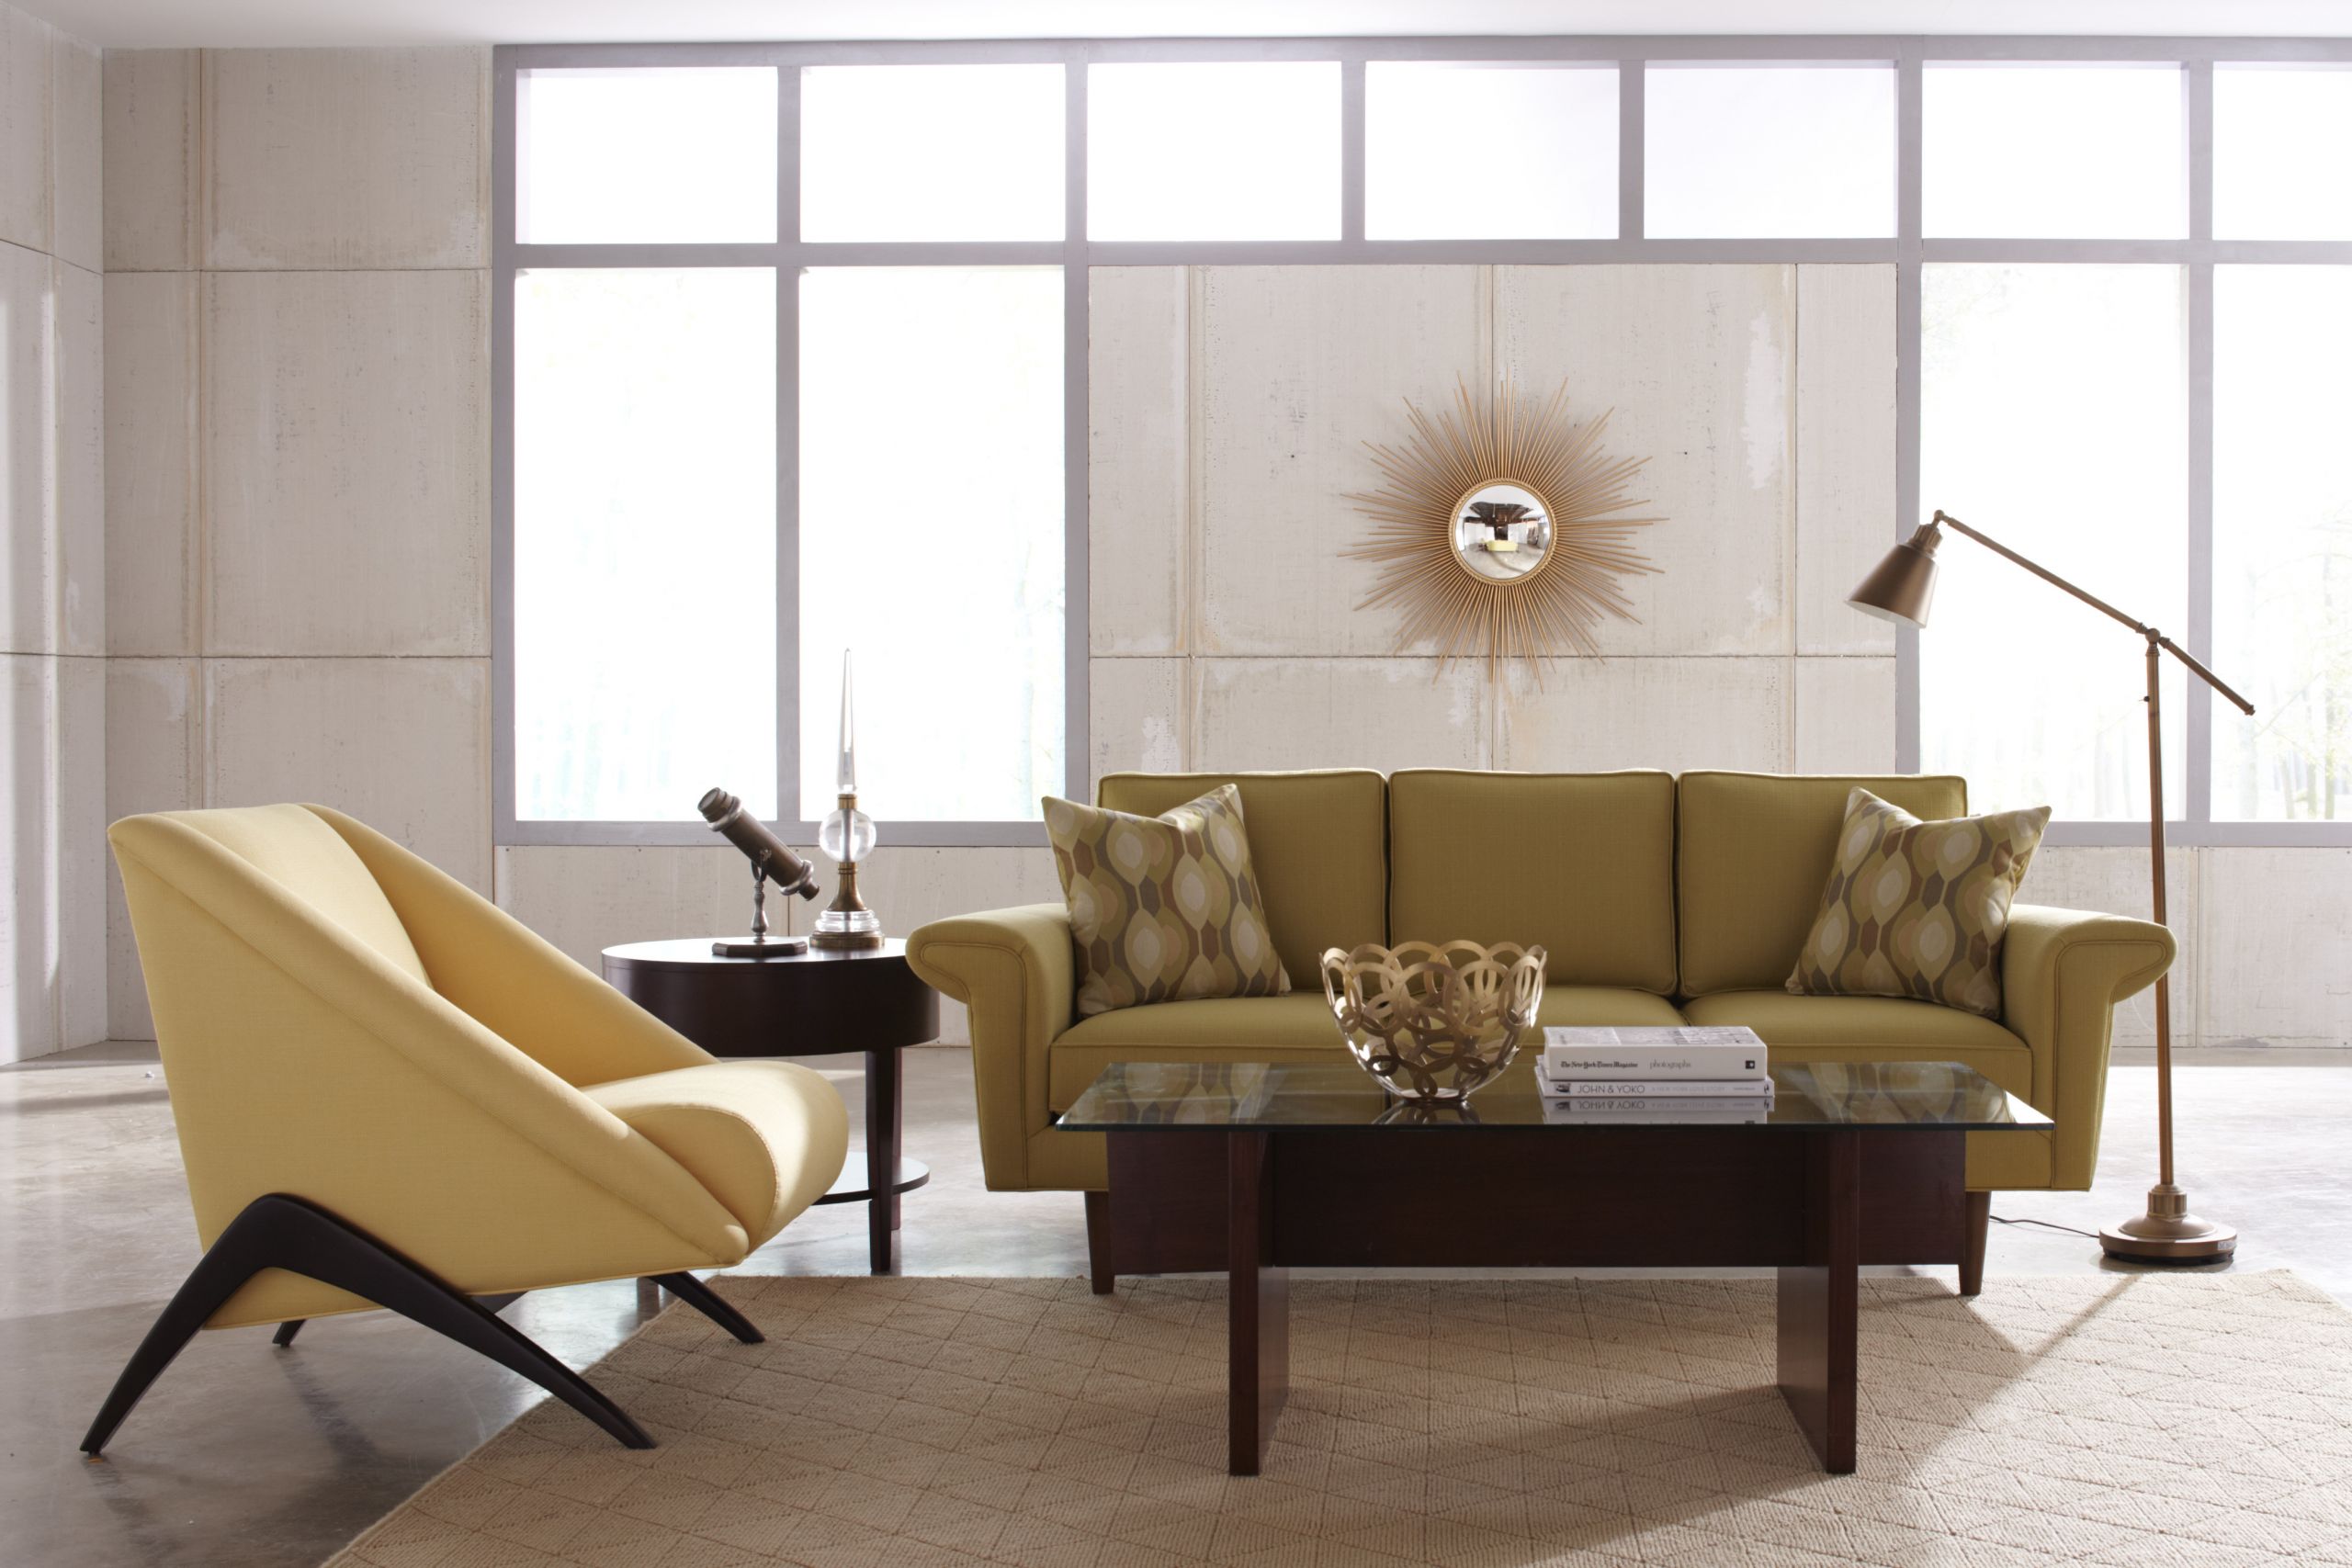 Mid-Century Modern Living Room
 Contemporary or Modern What’s the difference in interior